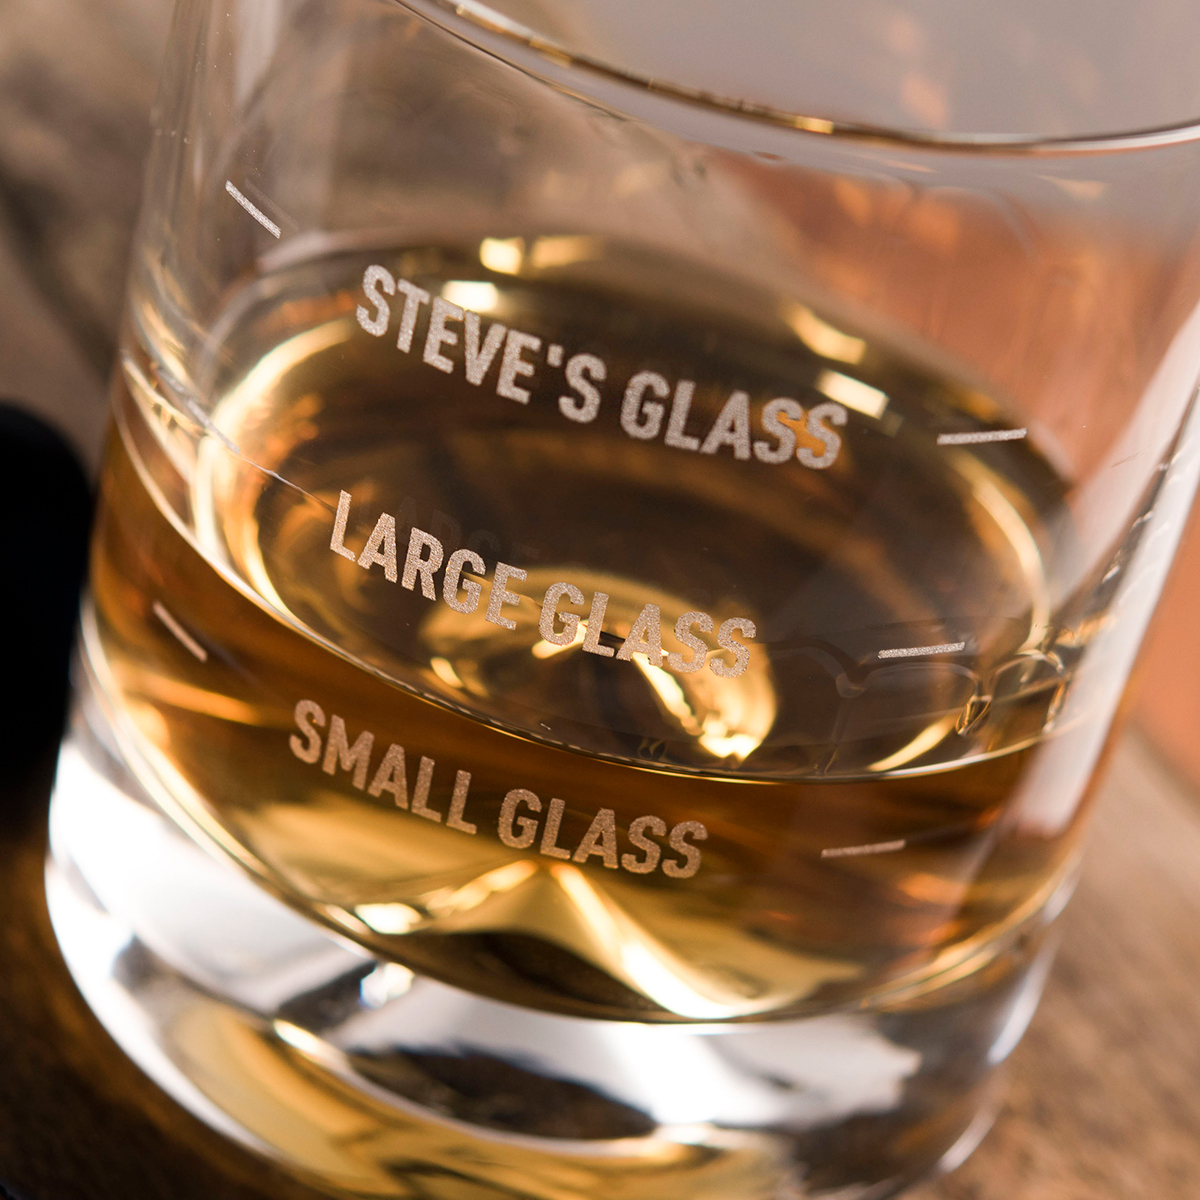 Engraved Stern Whisky Glass - Large & Small Measures